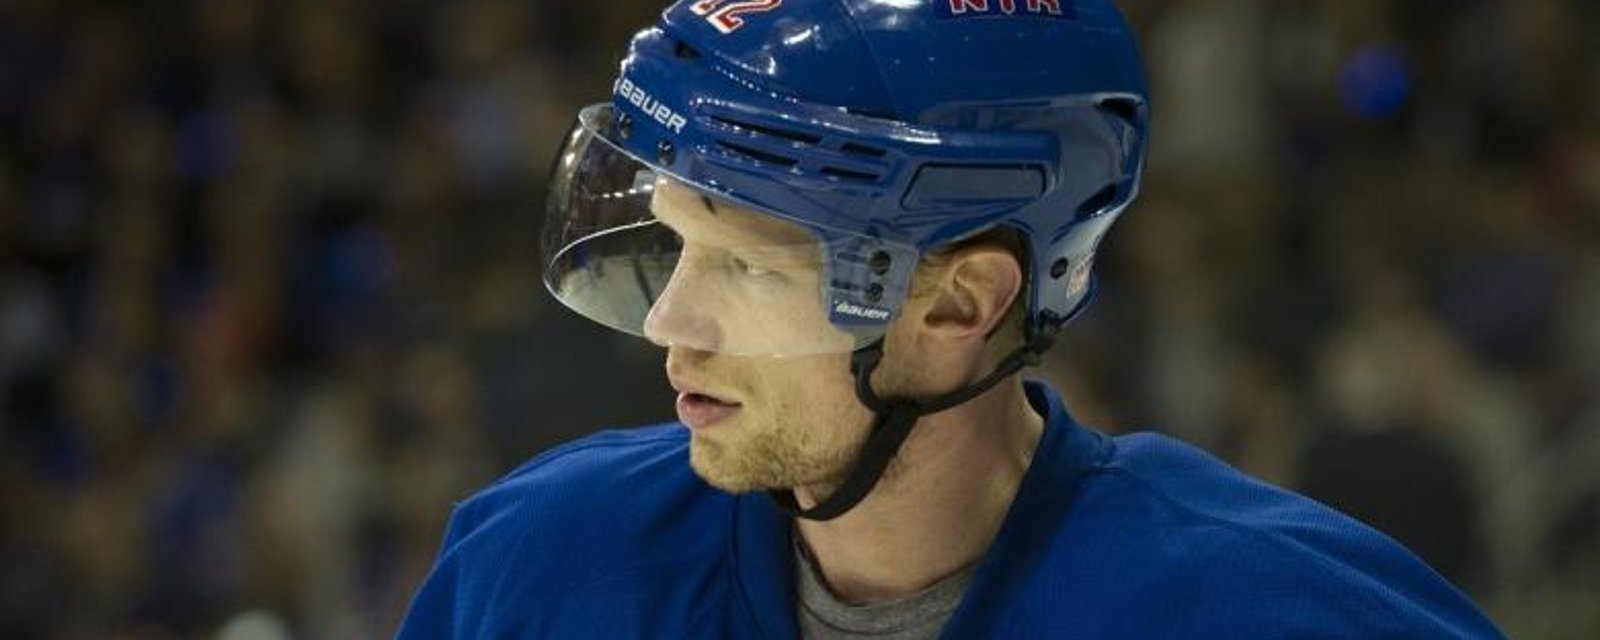 Breaking: Former NHL star Eric Staal signs a new contract with a new team.